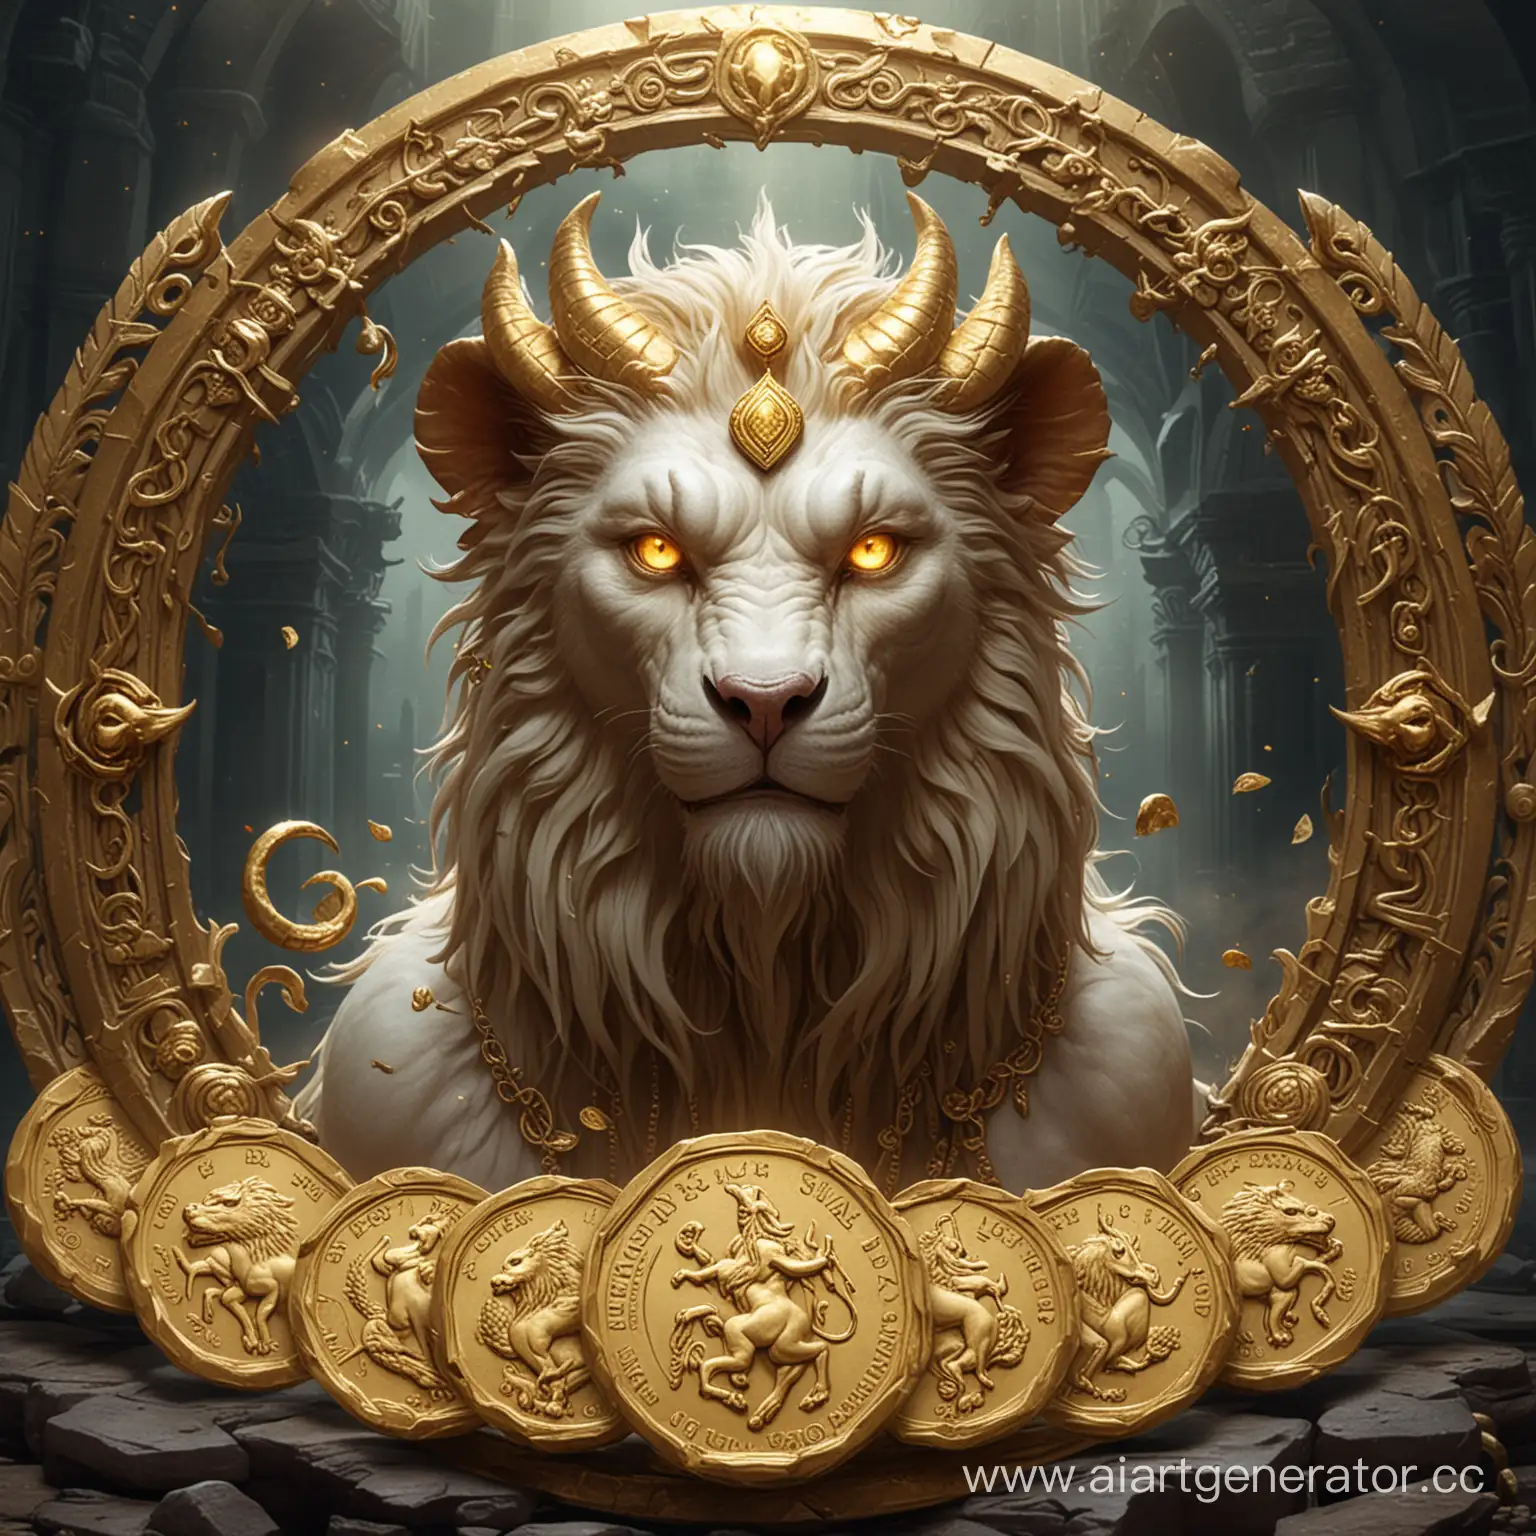 create a mystic cult that with chimera as its god. And add gold coins that represent the main tokens of the cult.